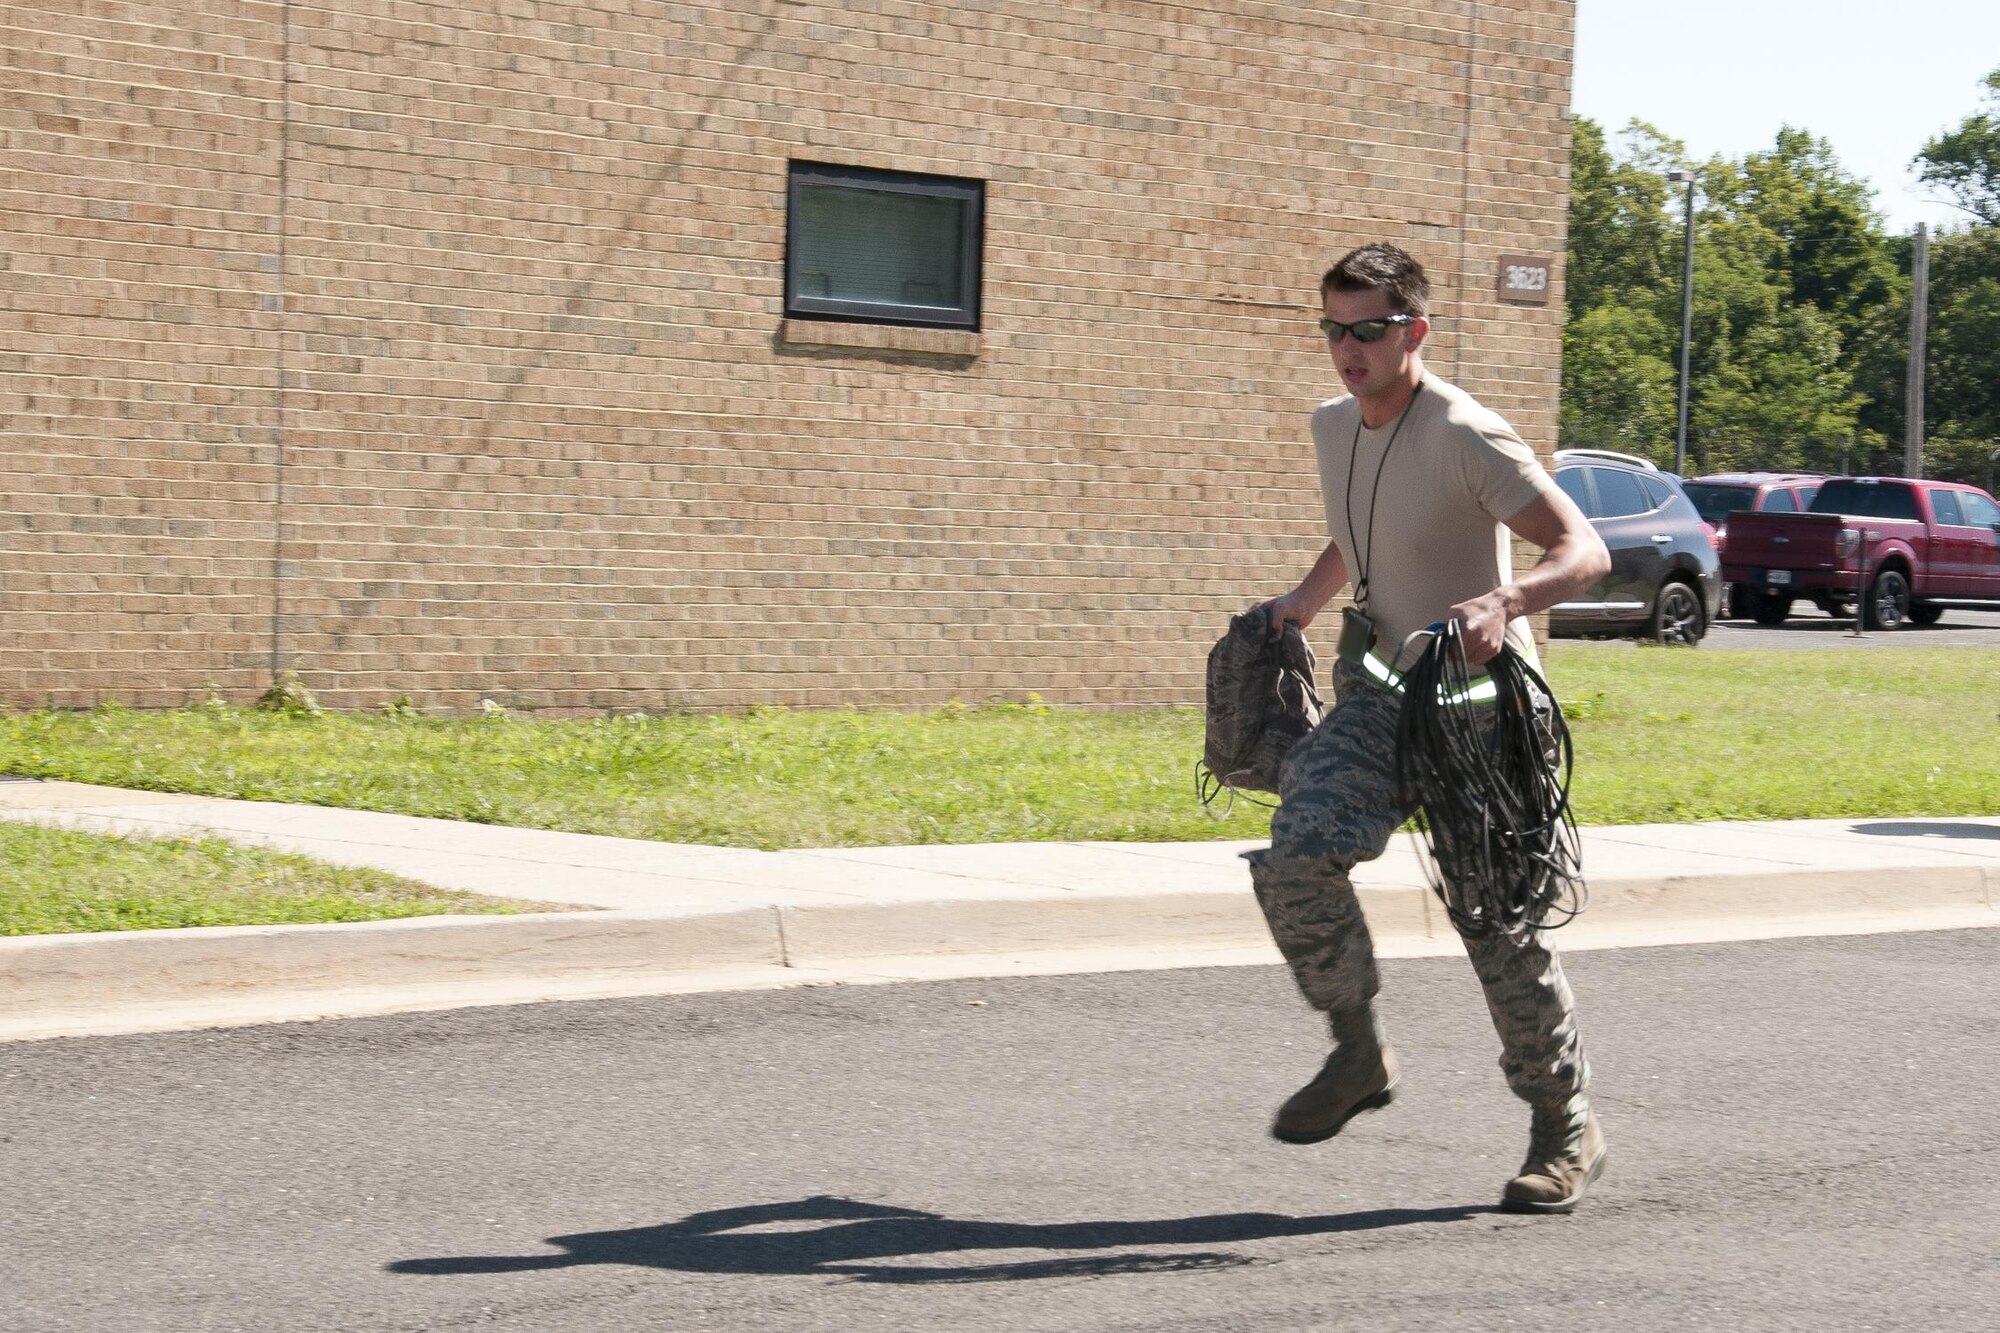 A member of the 459th Aircraft Maintenance Squadron runs toward the flight line after being alerted to a mission during a readiness exercise on Joint Base Andrews, Md., Sunday, Aug. 7, 2016. The exercise validates the unit’s readiness to execute its nuclear mission. (U.S. Air Force photo/Staff Sgt. Kat Justen)